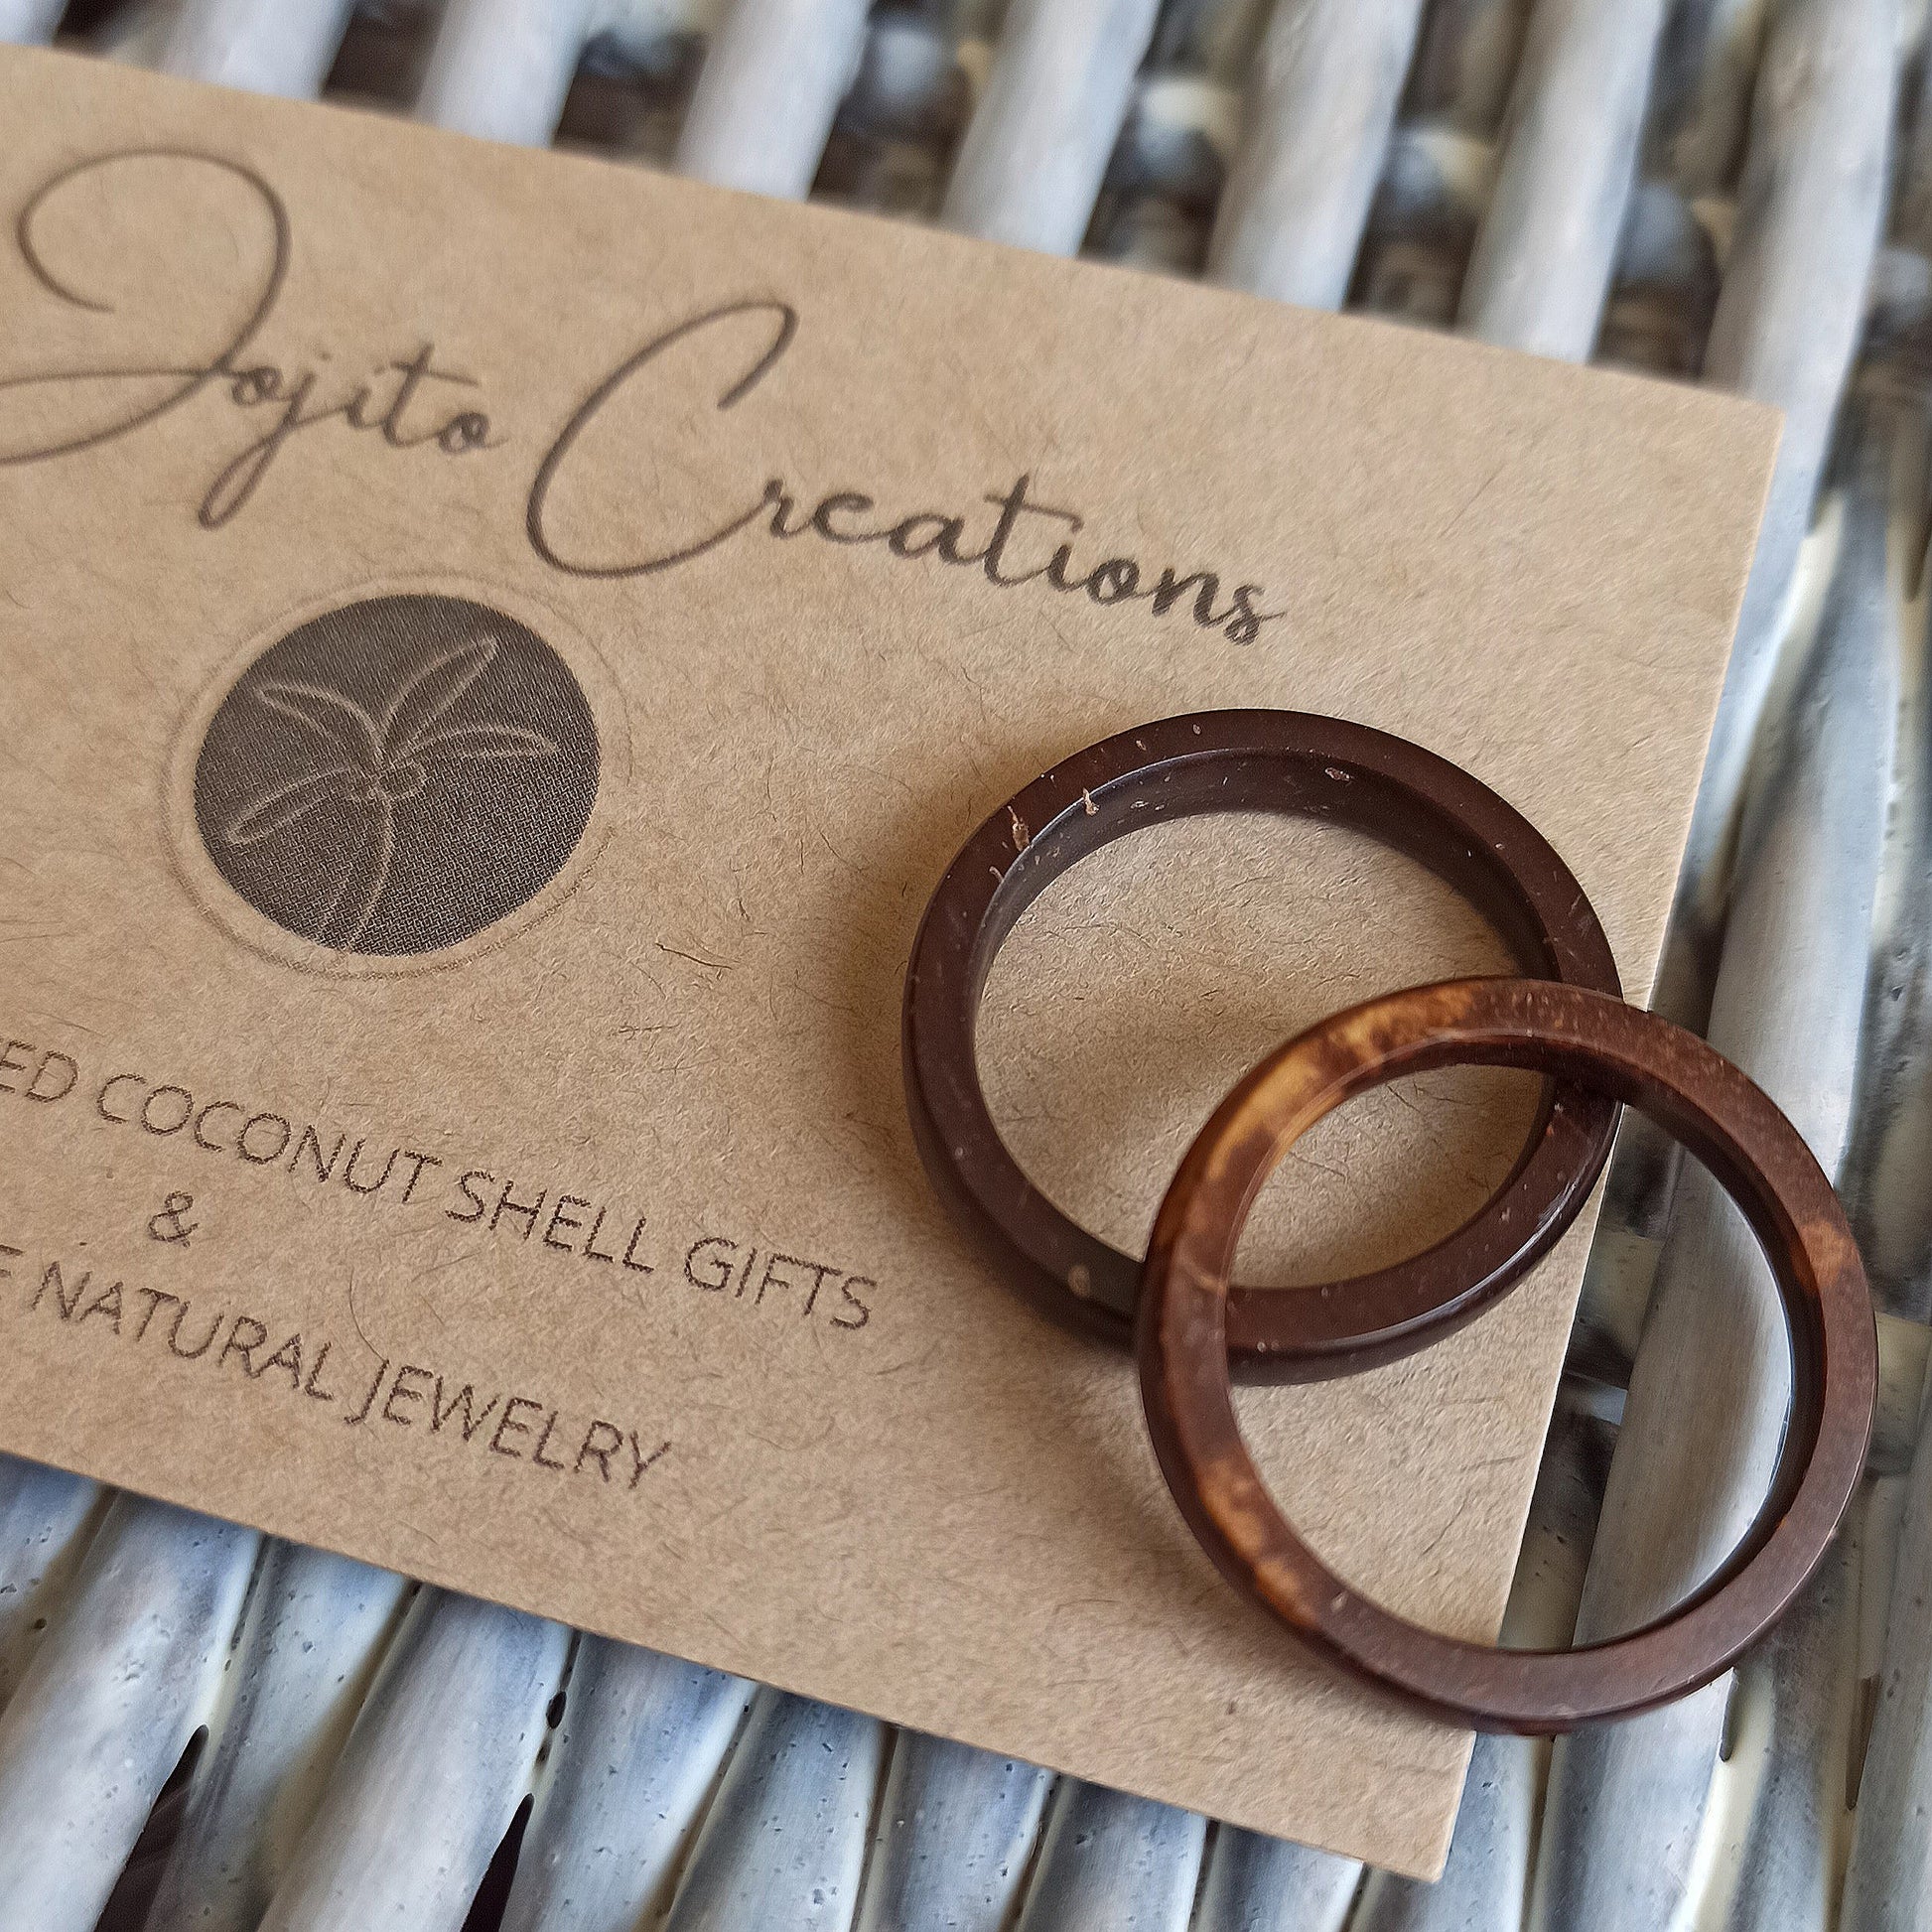 Coconut Shell Band rings, Unisex Rings, Wooden Rings for any occasion, Wedding rings, anniversary rings